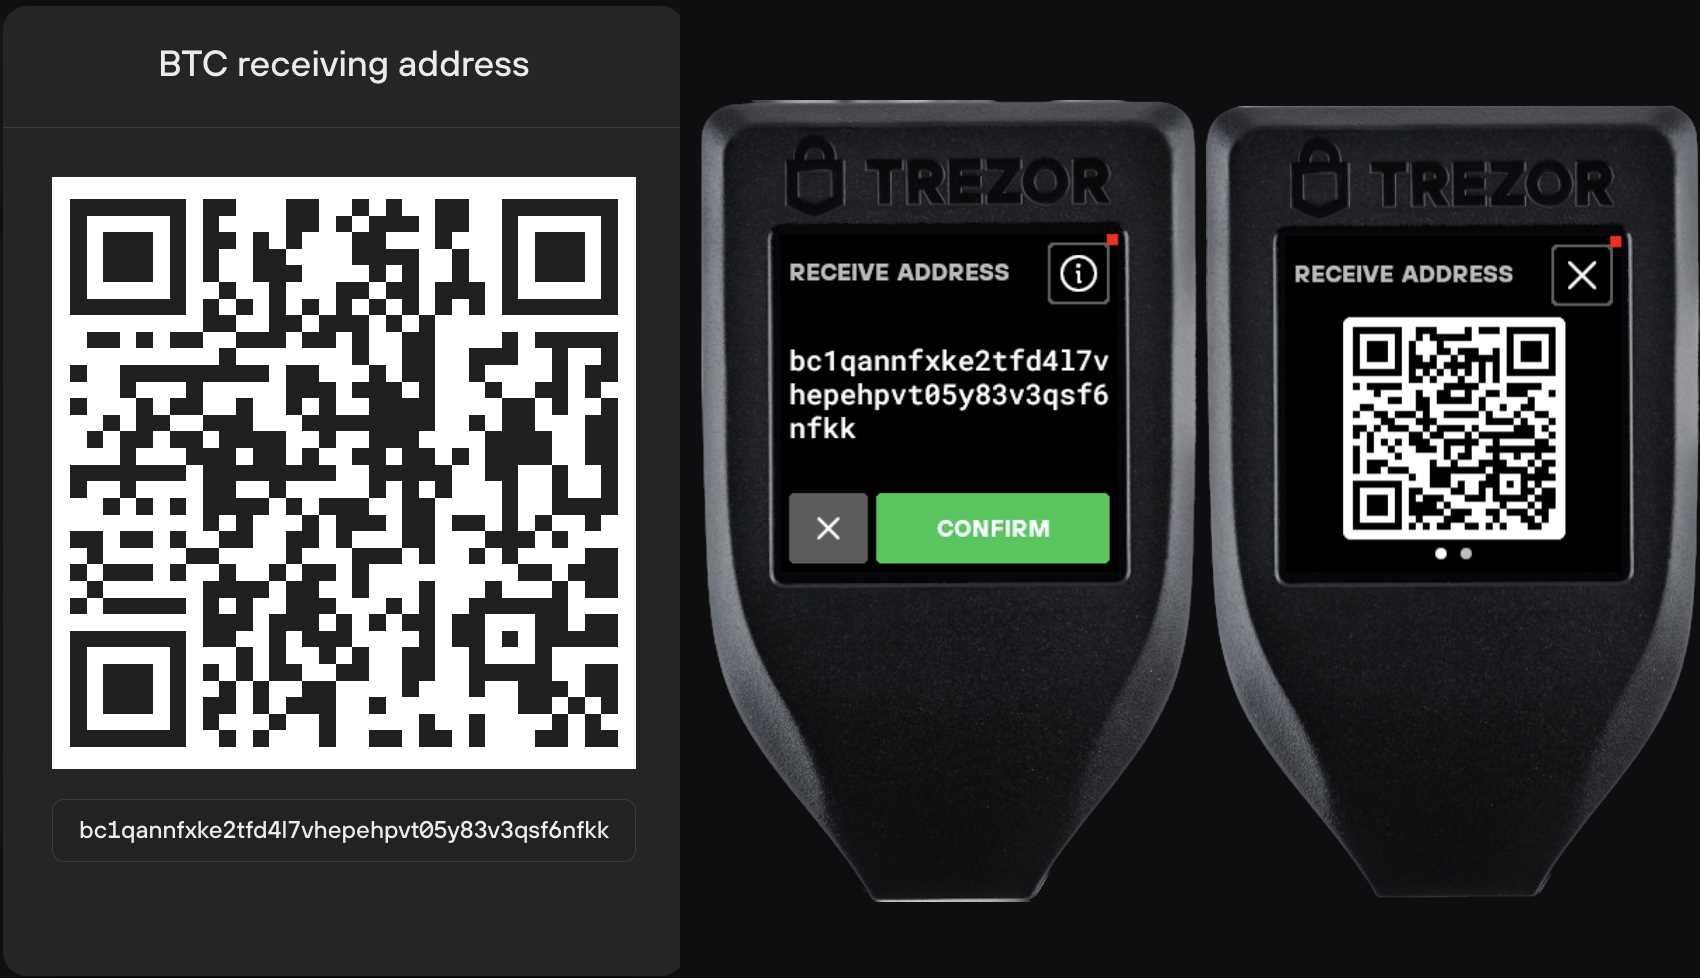 What is a Trezor wallet?